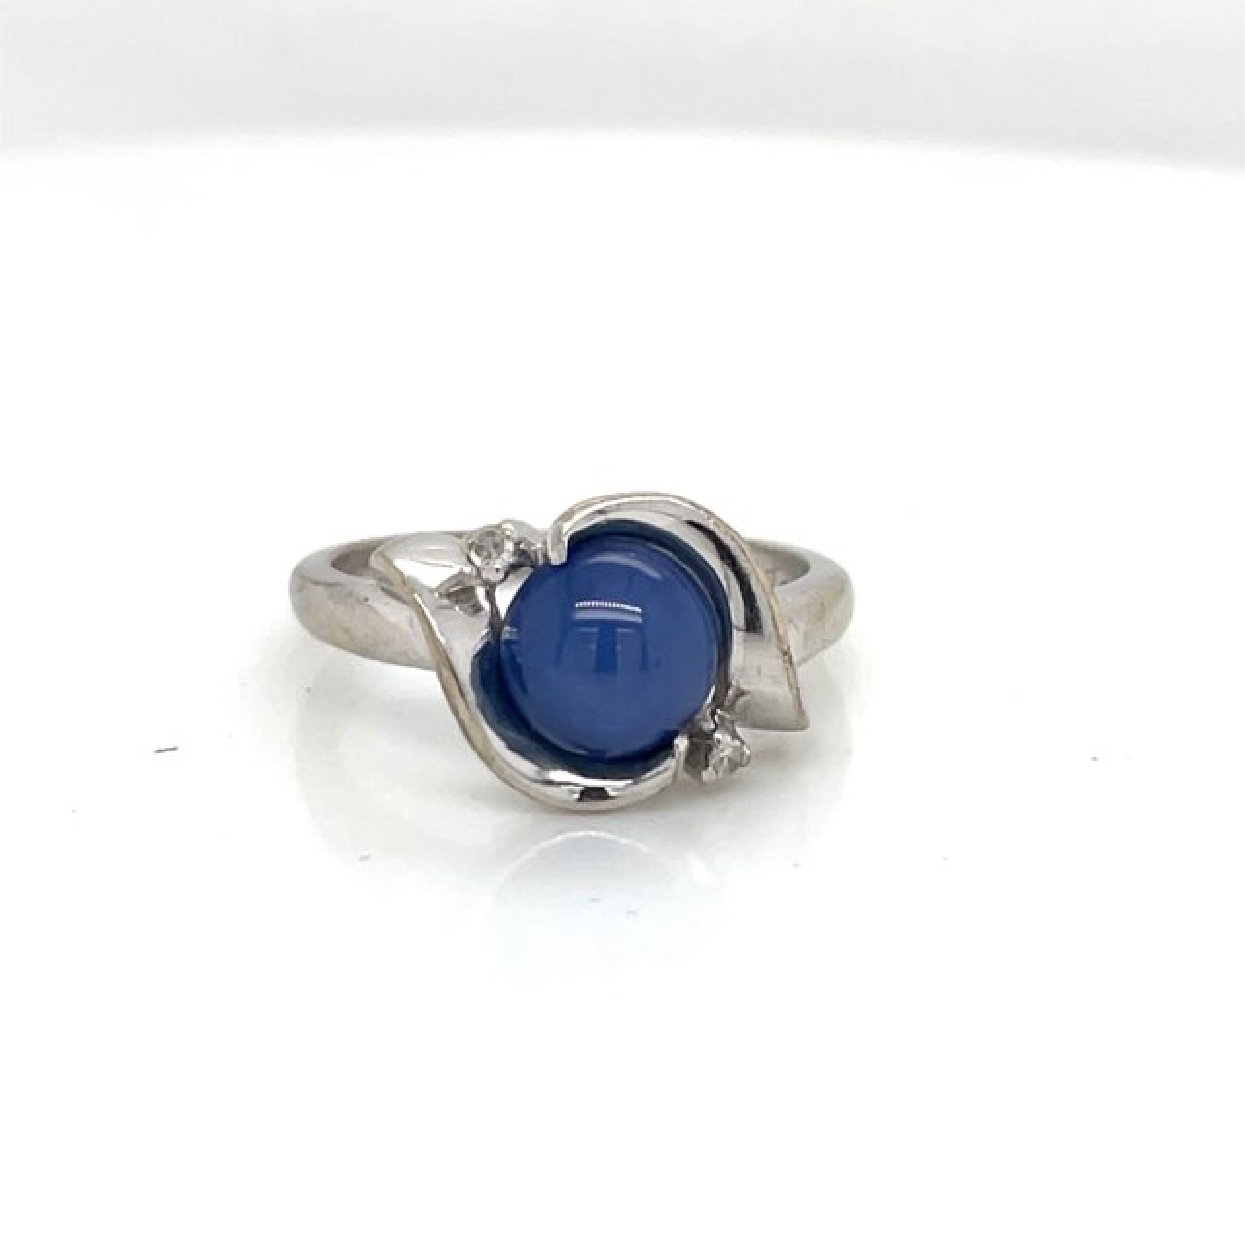 14K White Gold Star Sapphire Ring with Diamond Accents

Size 5.75